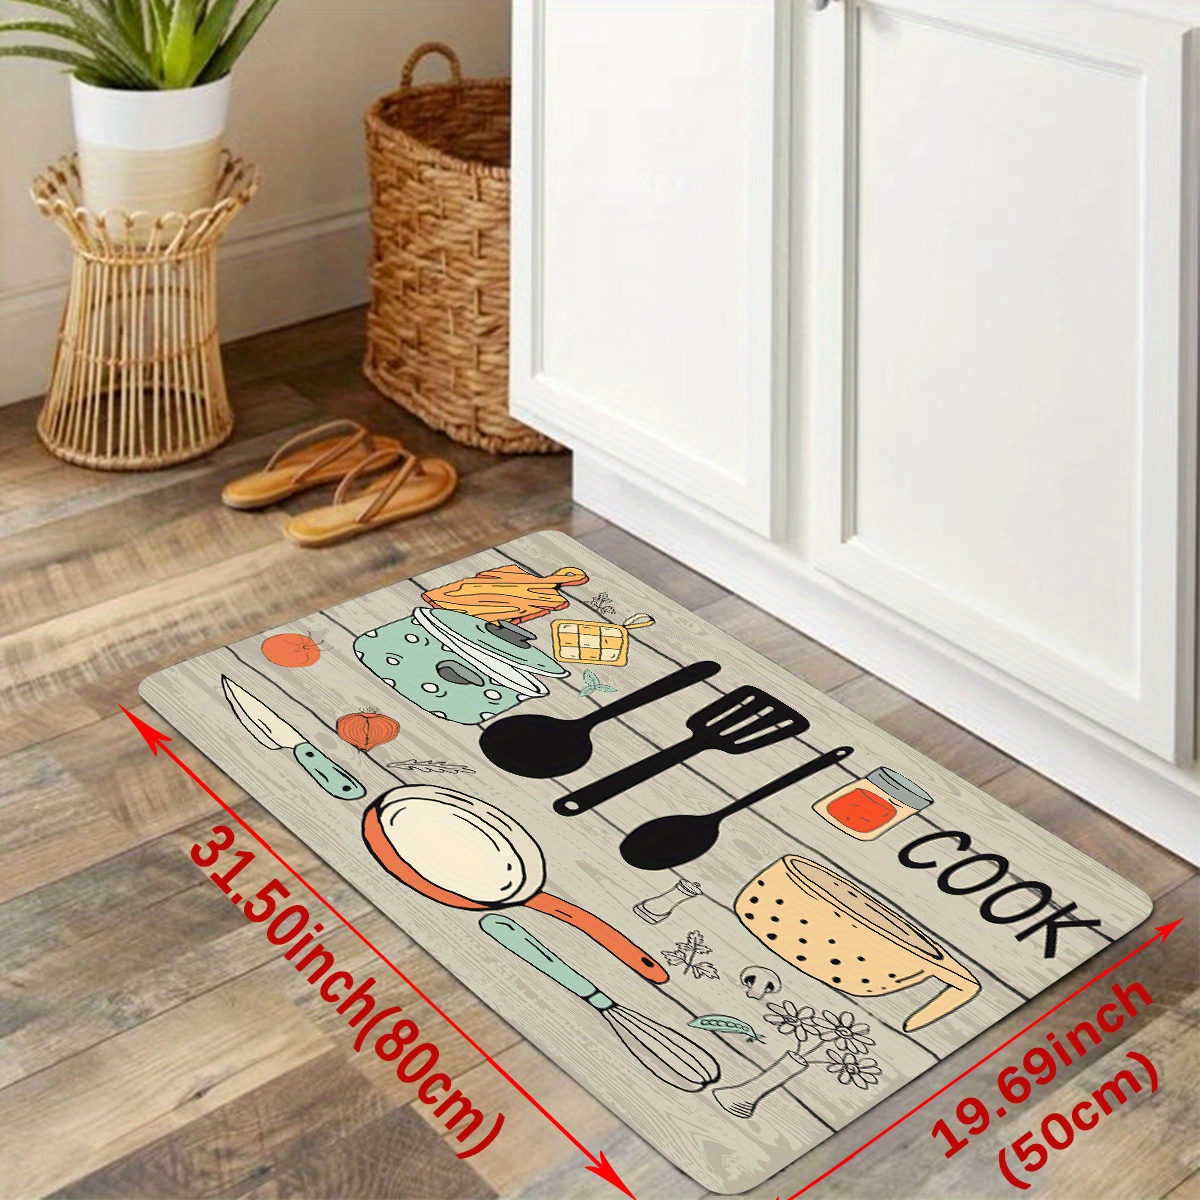 Vive Comb Anti-Fatigue Kitchen Mat & Rug - Set of 2 Cushioned Non-Slip Kitchen Floor Mats, Great for Use in Front of Sink, Runner Rugs for Home, Office, Laundry